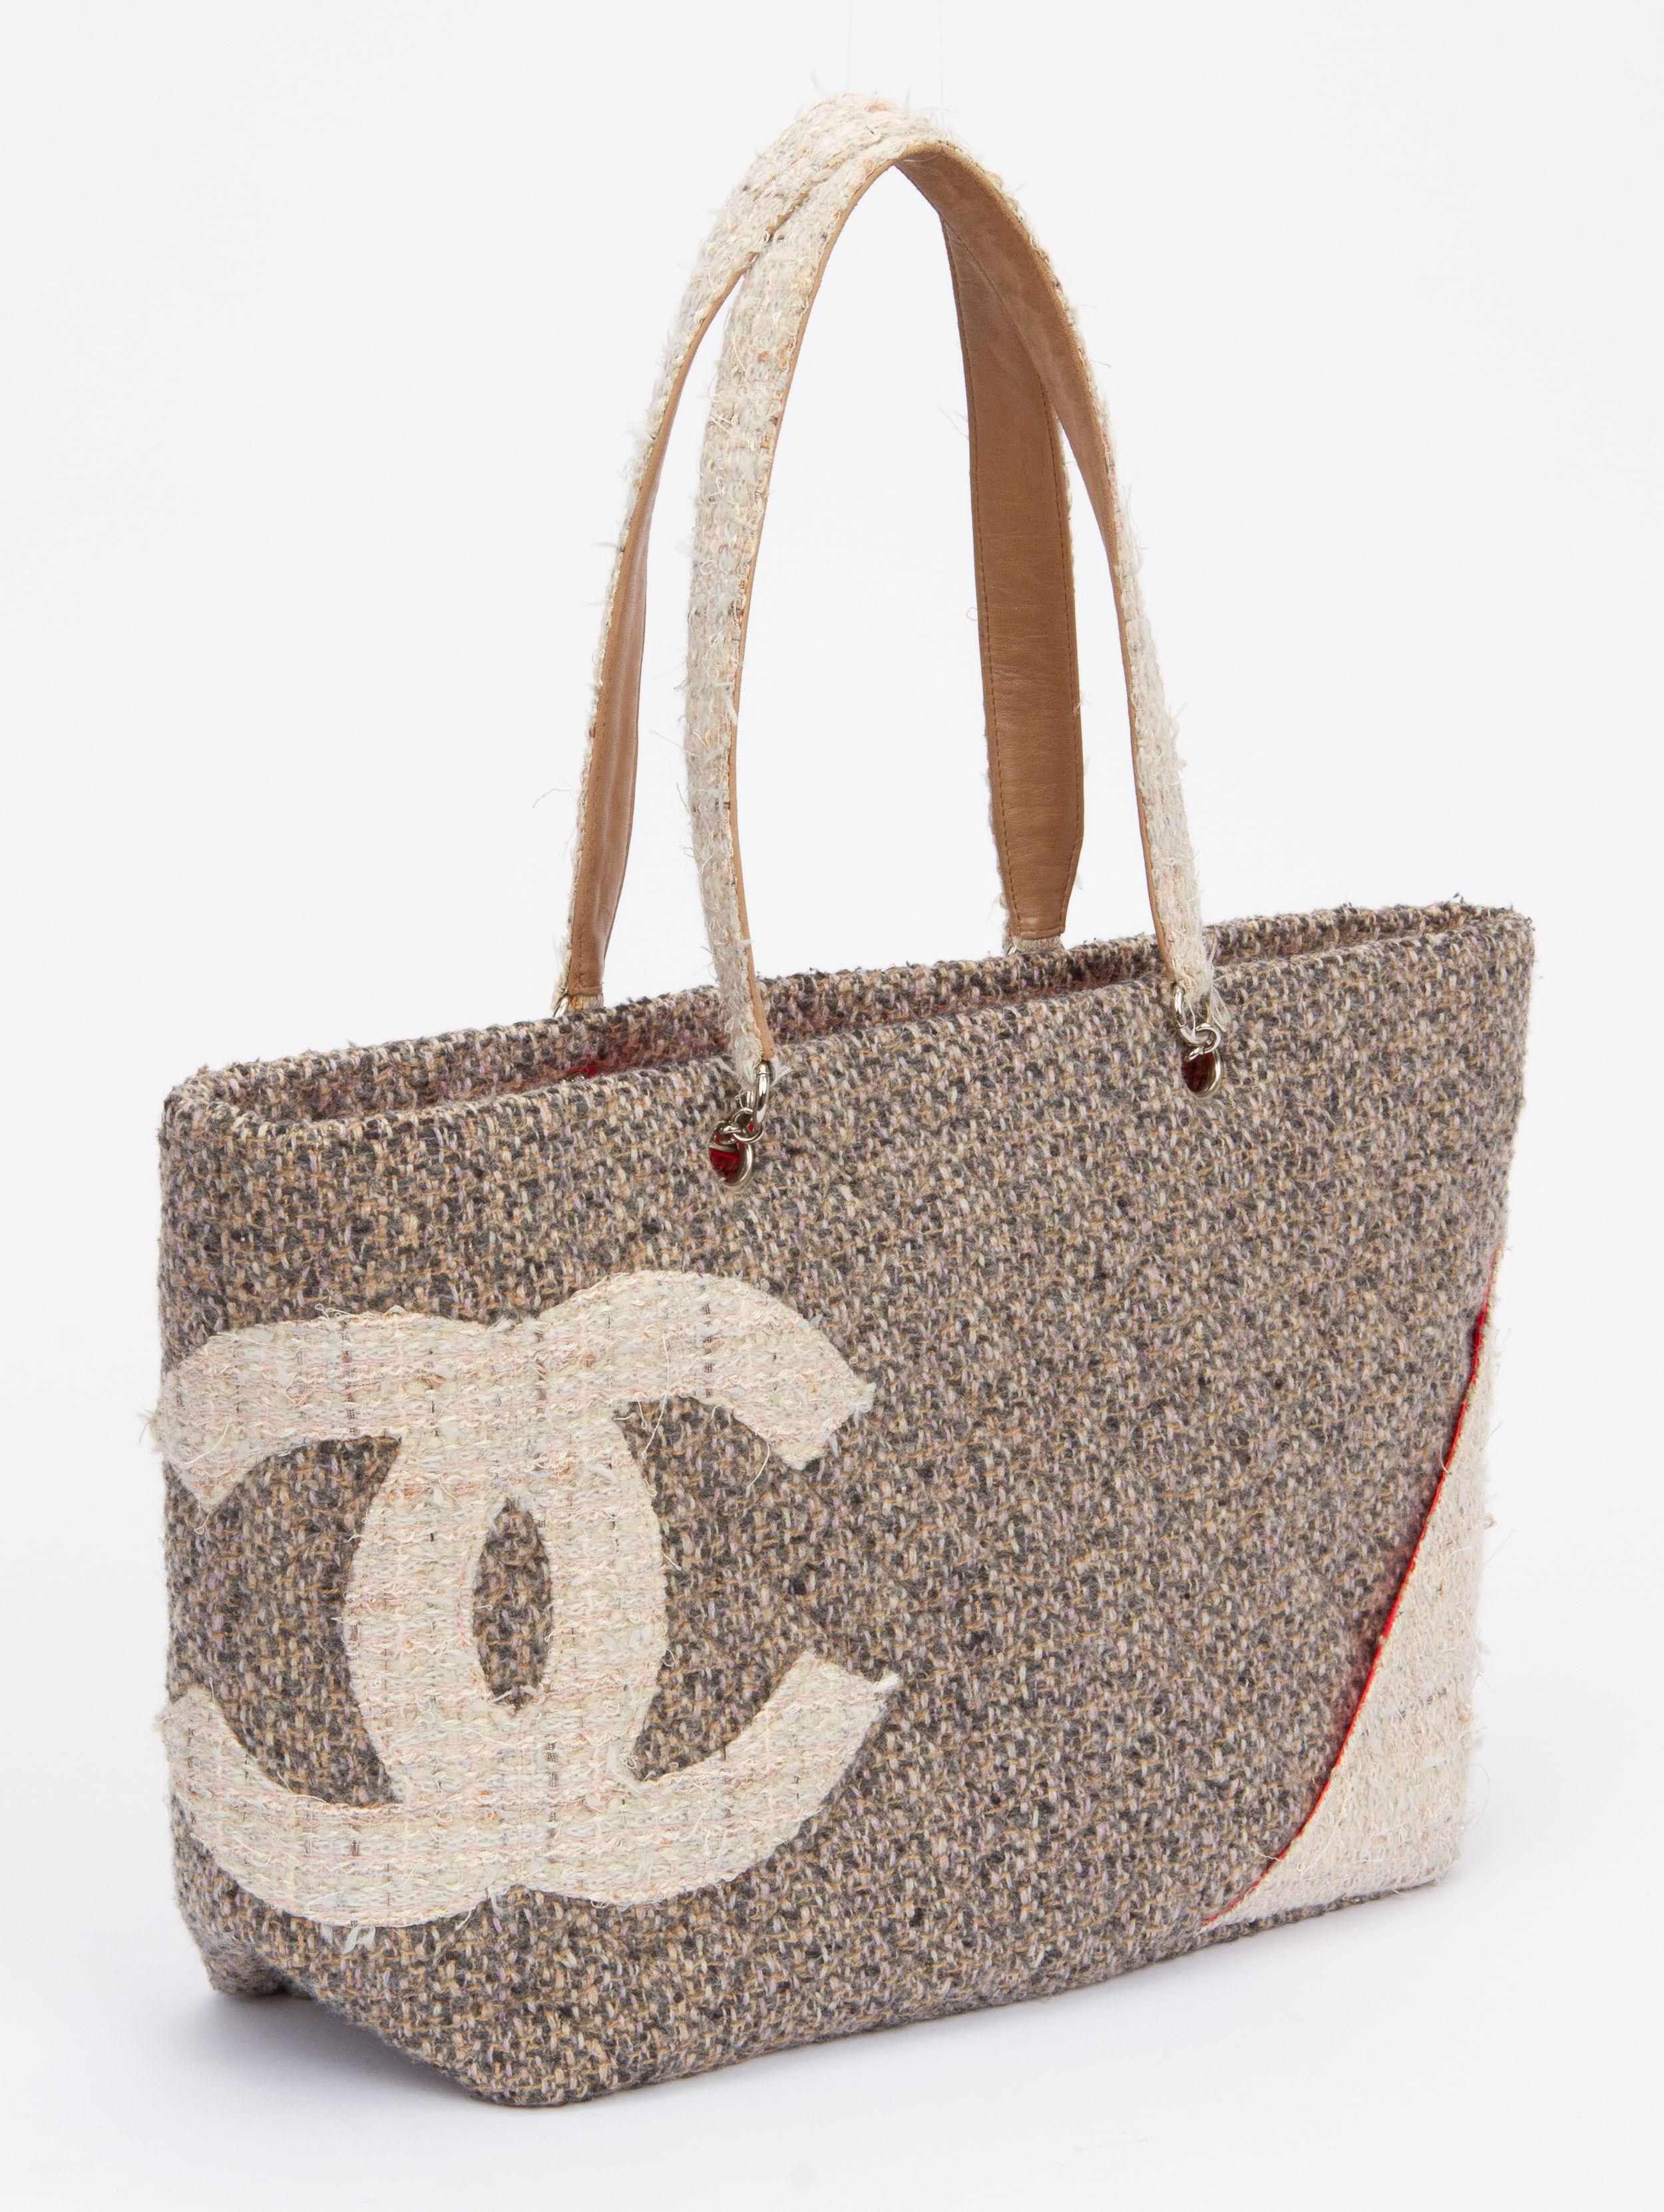 Chanel Shopping bag in gray bouclé wool with silver hardware. Closure with zip, internally capacious, the fluo pink lining with a strong touch of color. It has a double handle (9.5